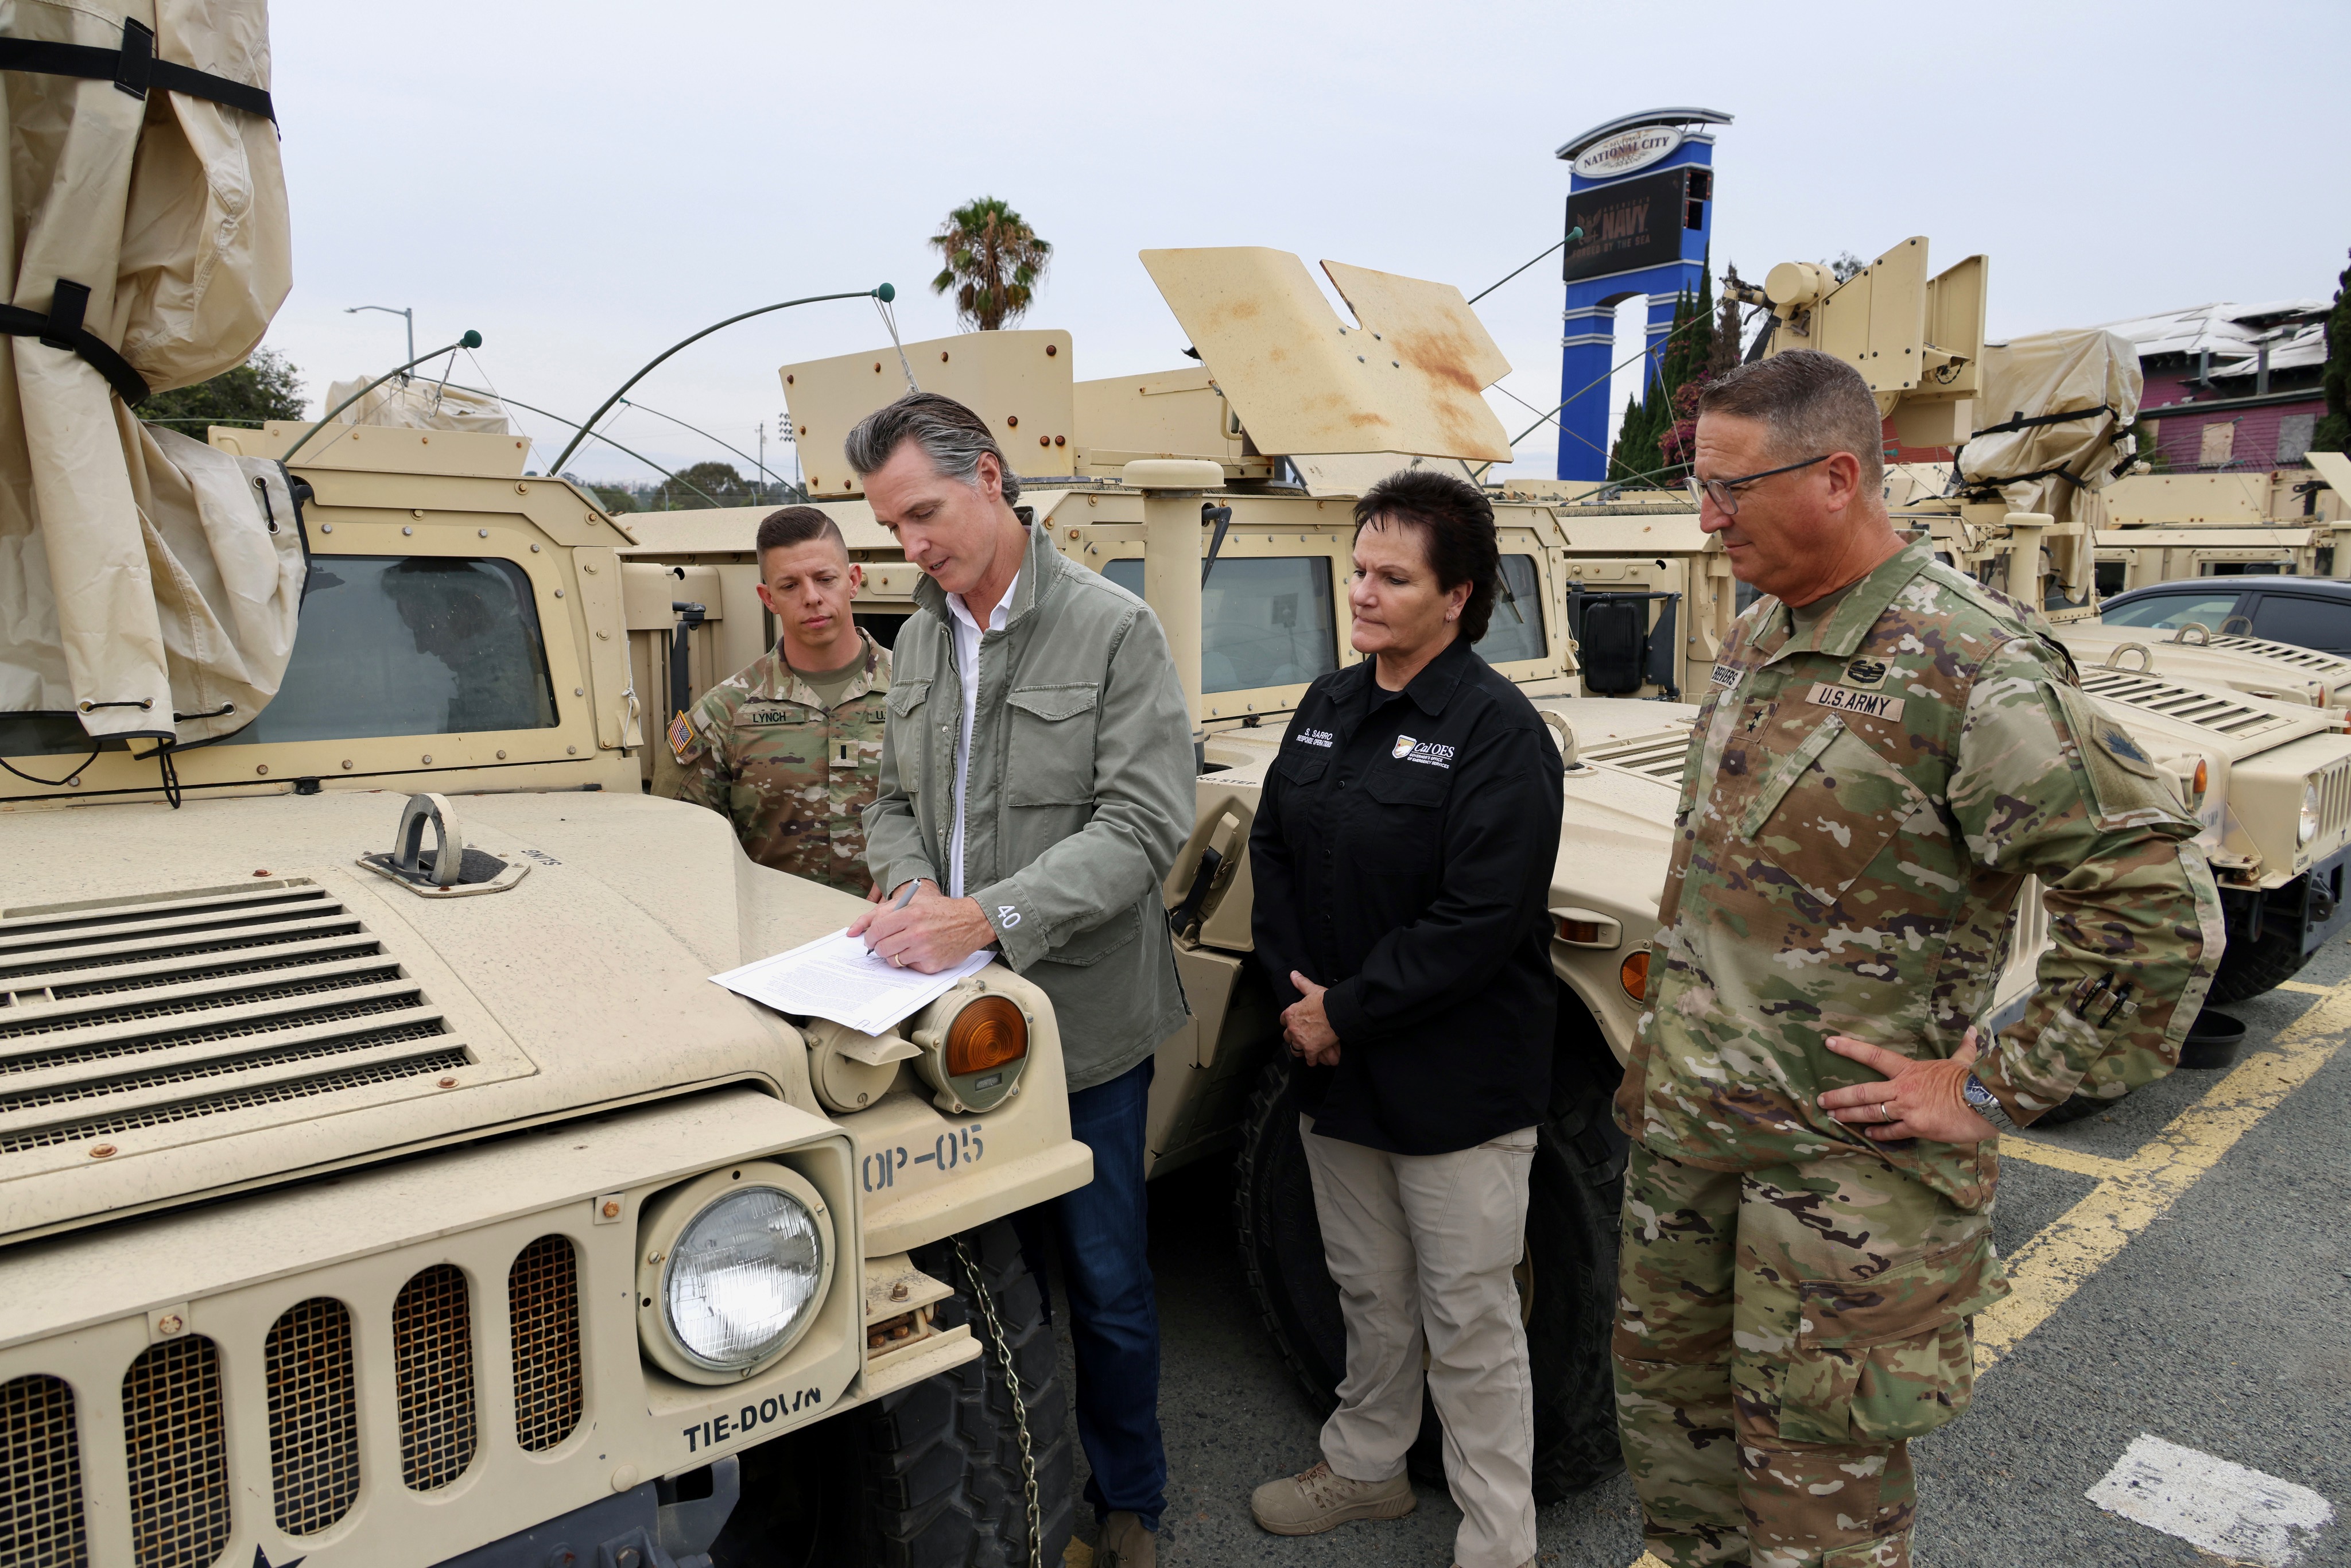 California Army National Guard opened facilities for emergency